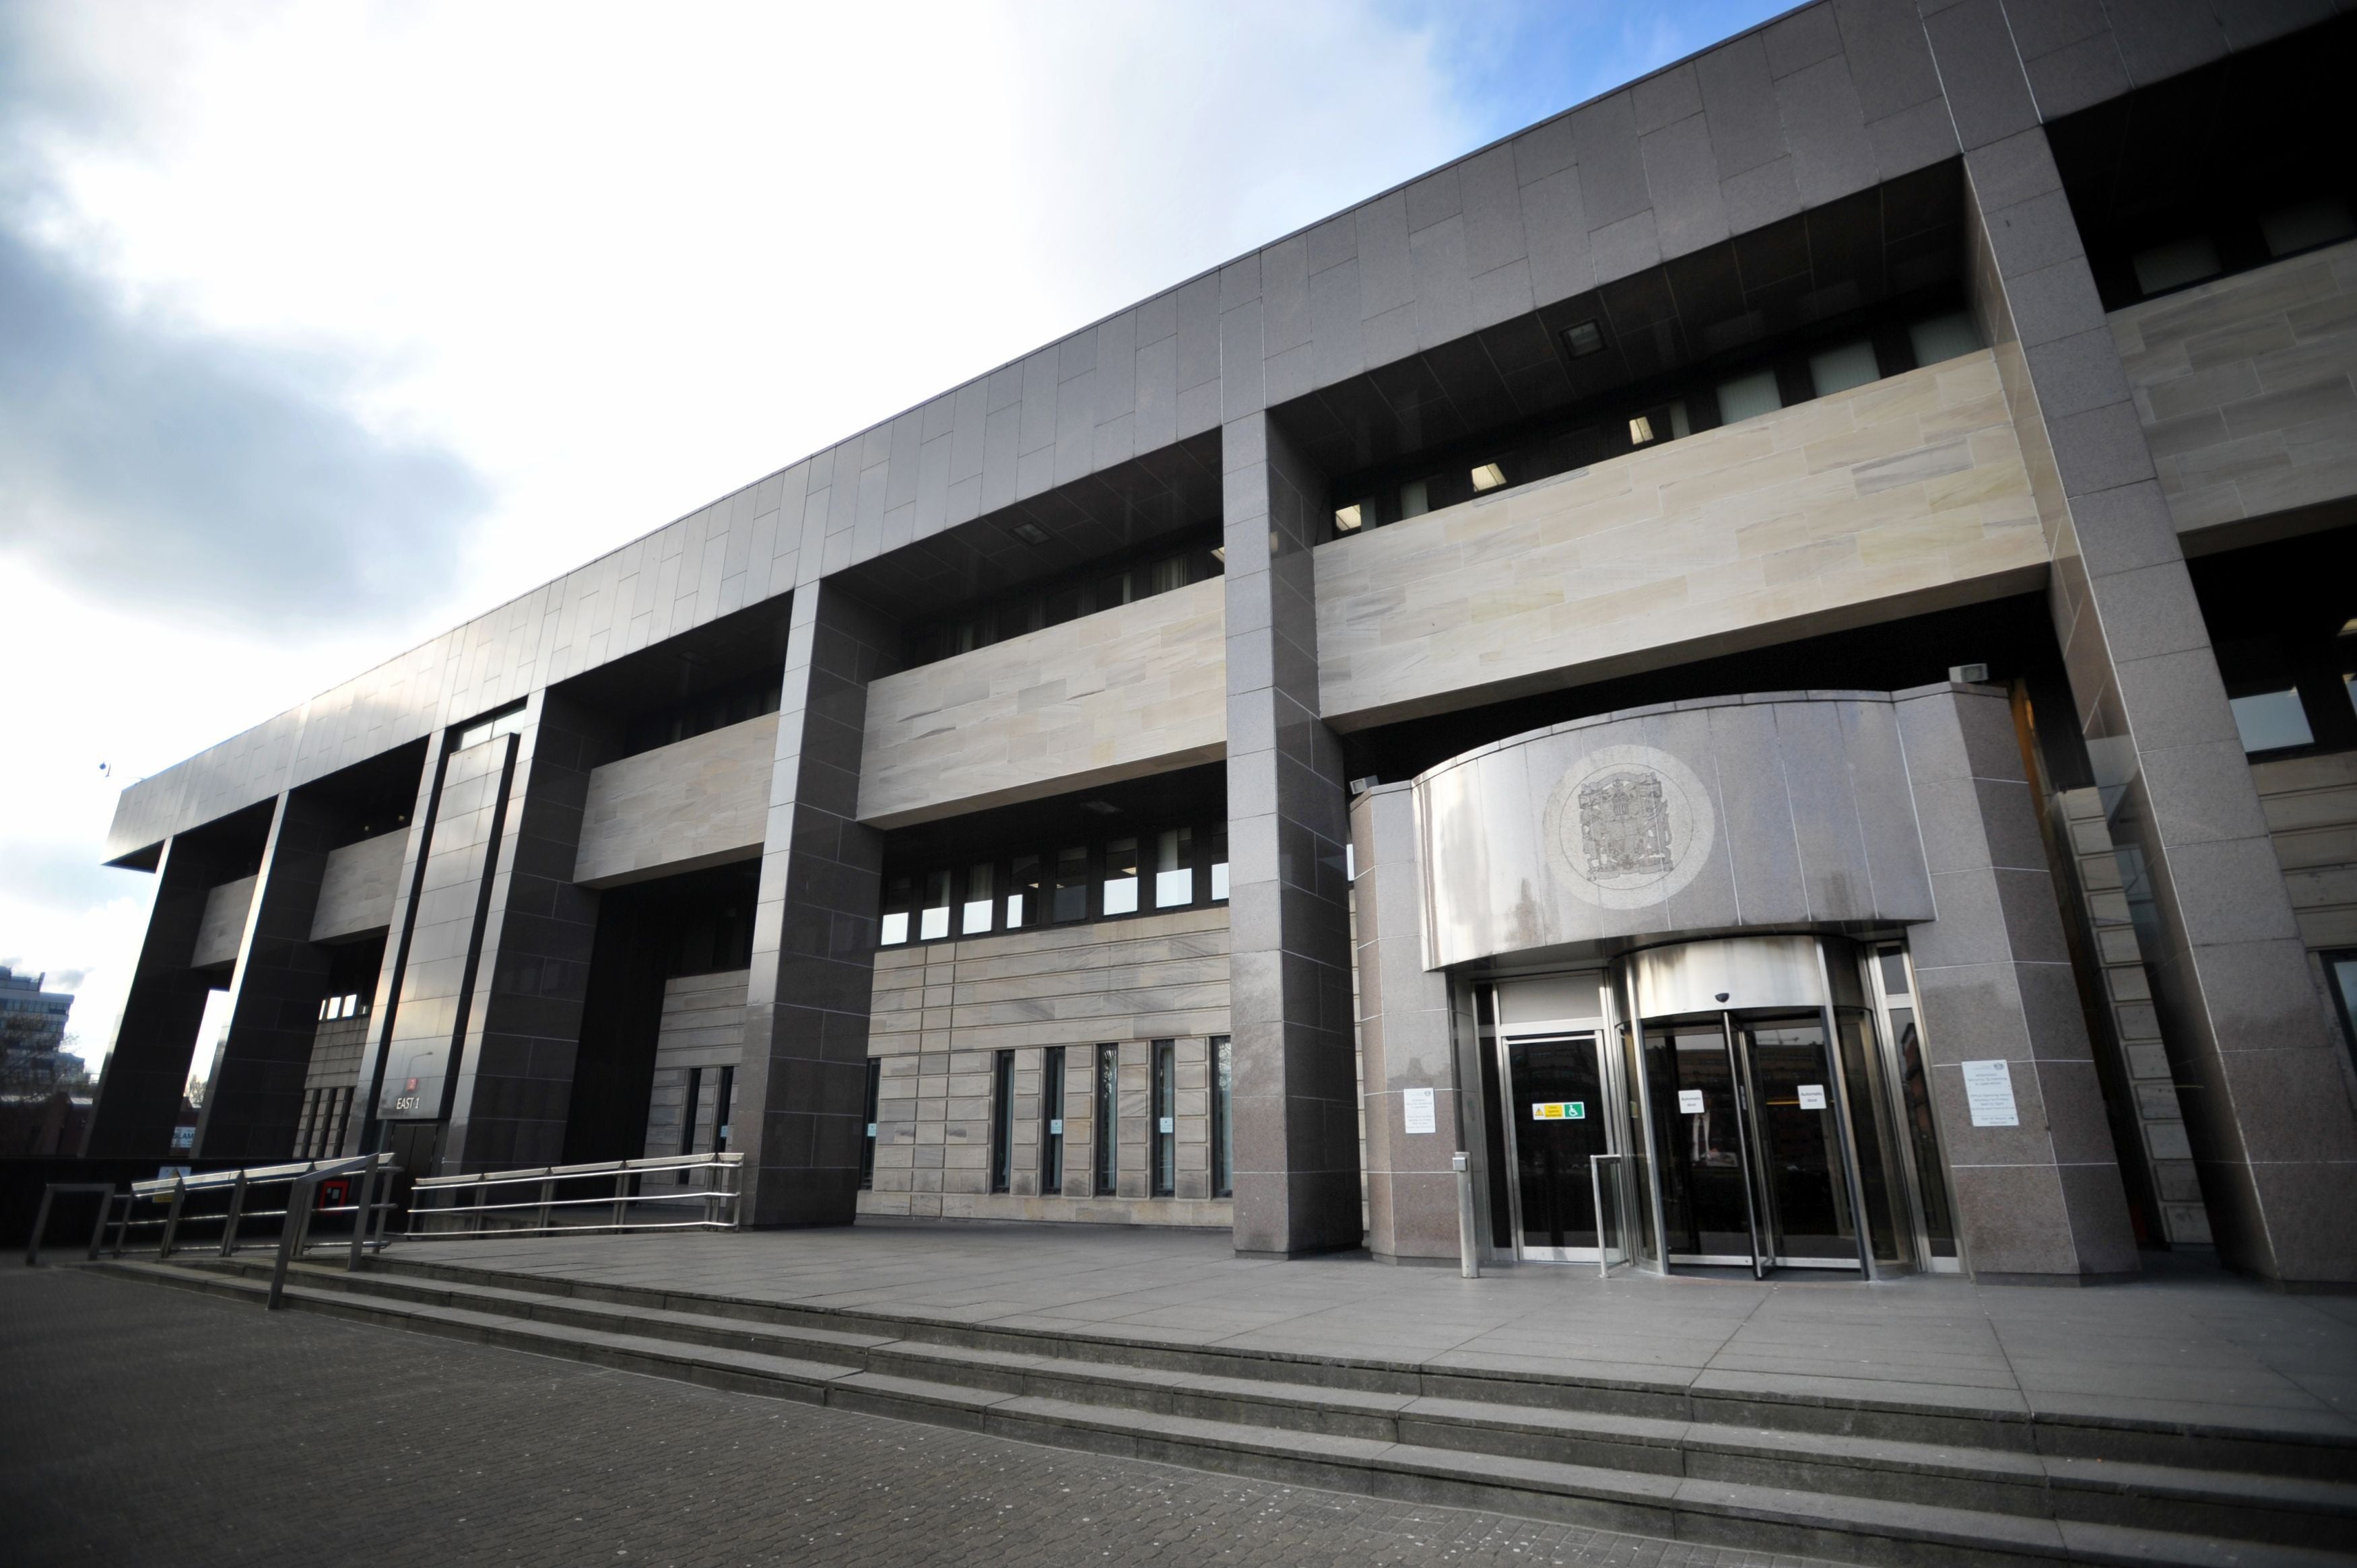 The trial is taking place at Glasgow Sheriff Court (Jane Barlow/PA)